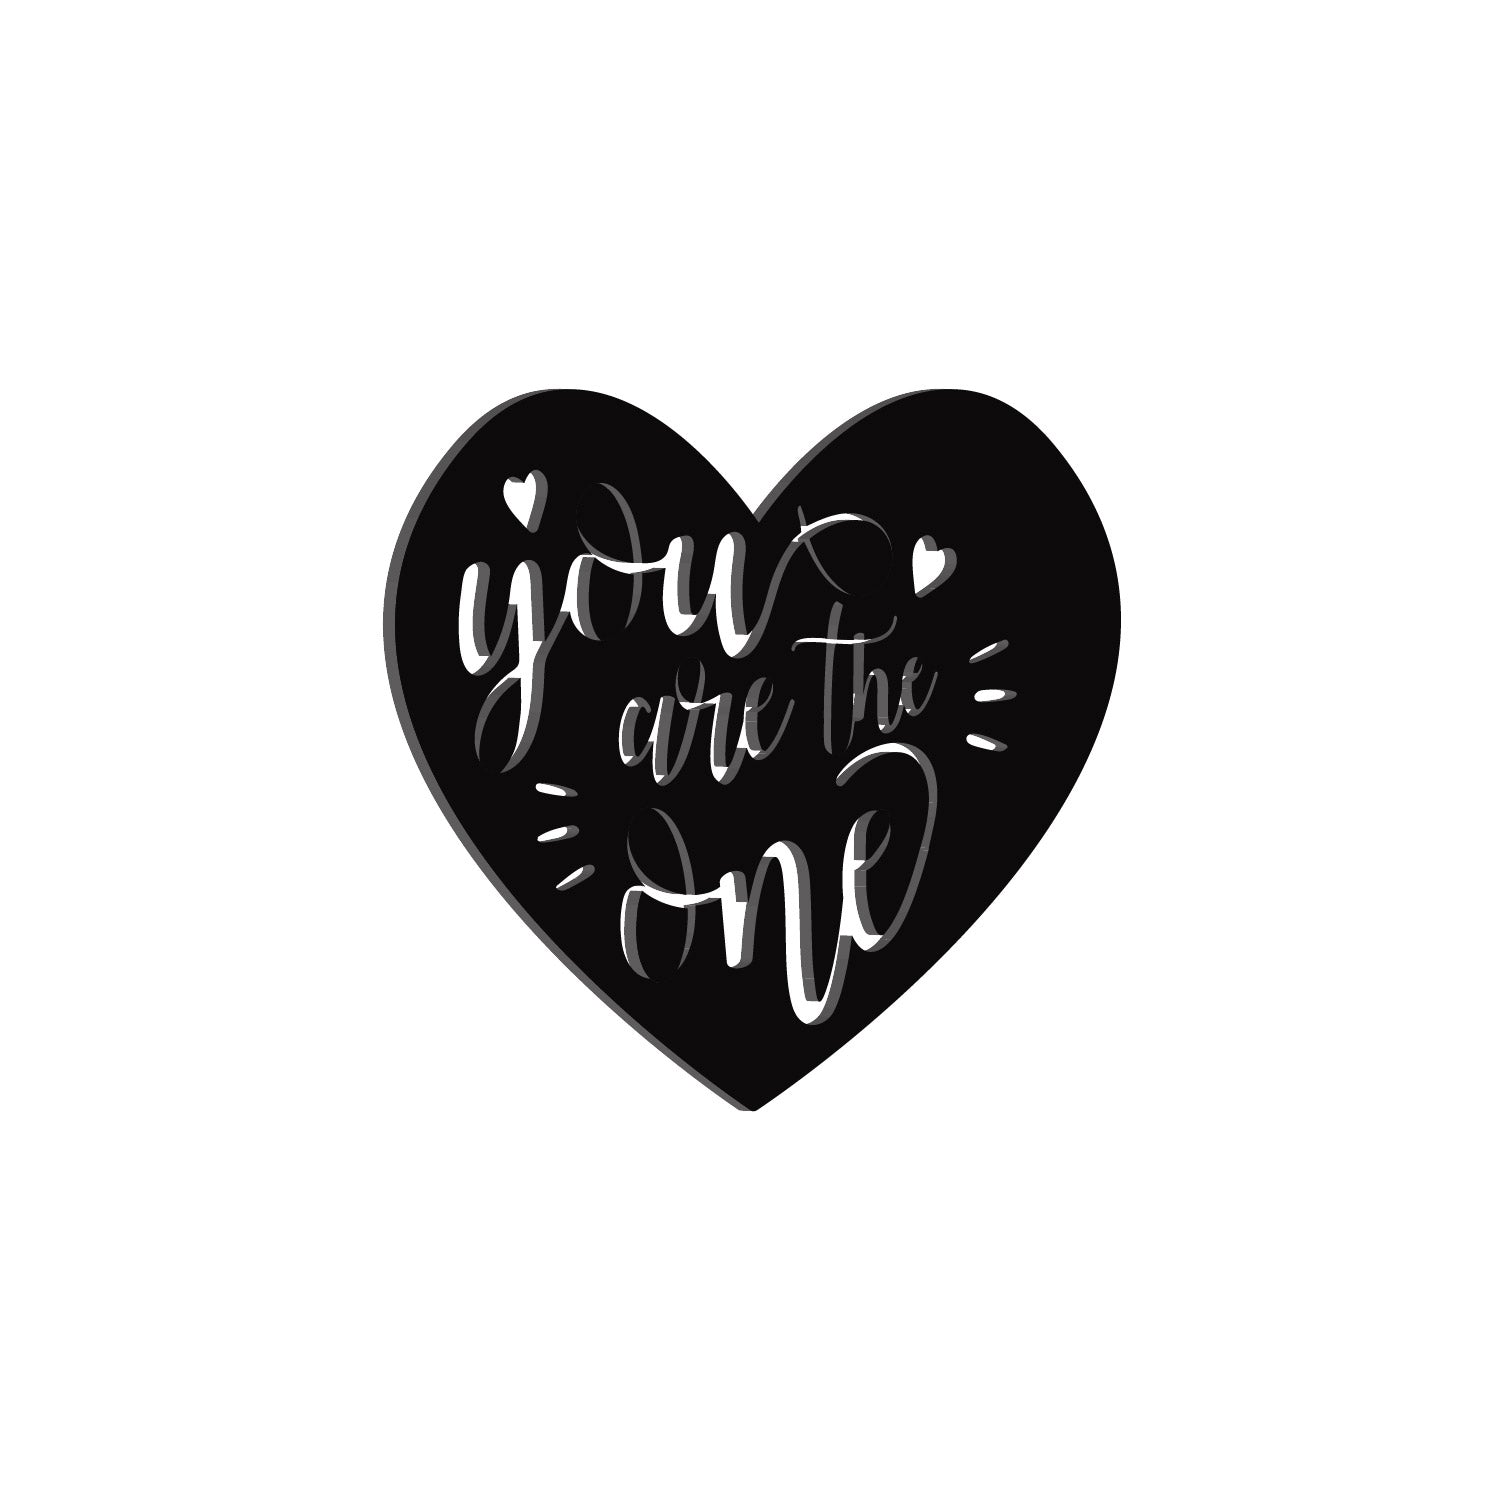 "You are the One" Love Theme Black Engineered Wood Wall Art Cutout, Ready to Hang Home Decor 4